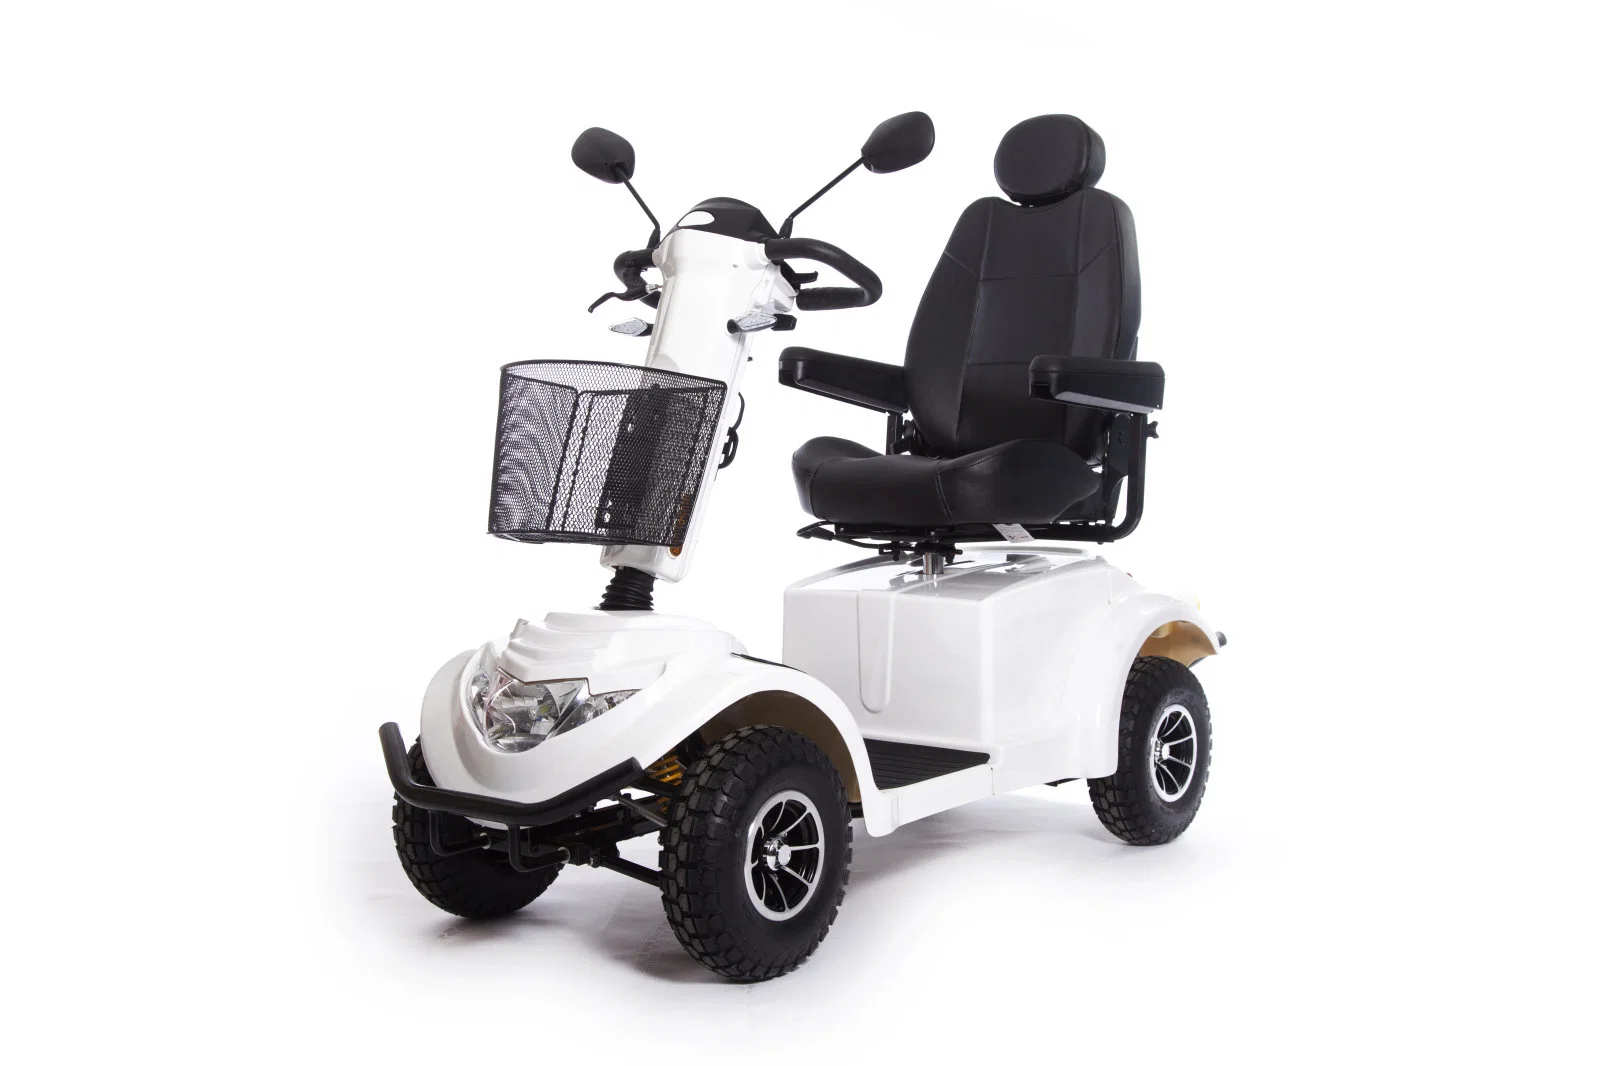 Handicapped 4 Wheels Mobility Scooter for Elder People